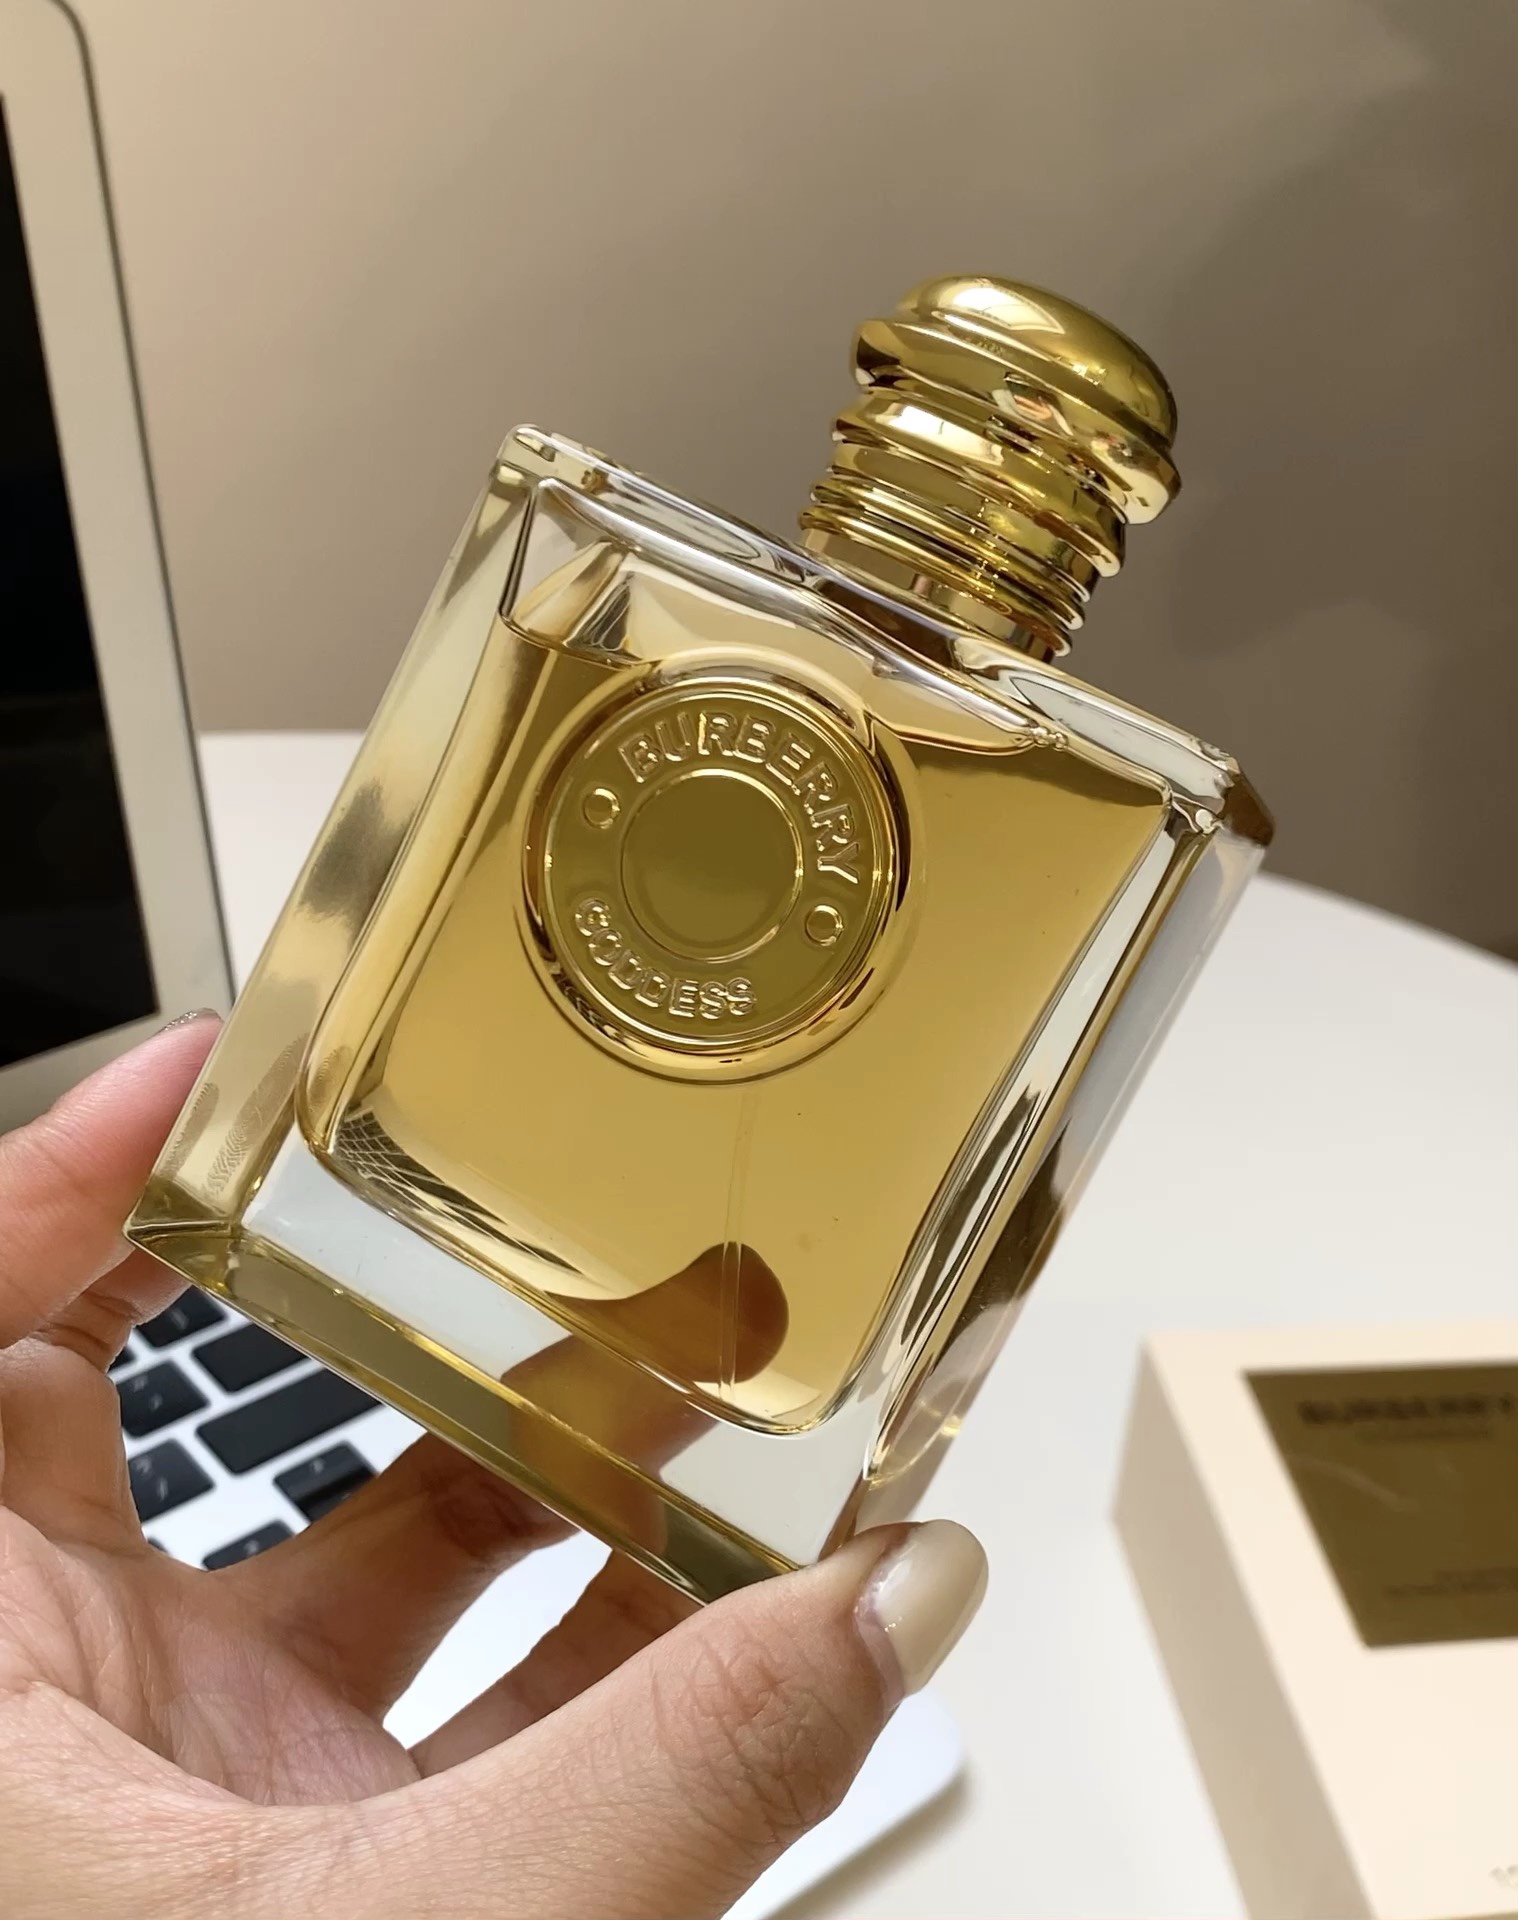 Burberry Perfume Buy the Best High Quality Replica